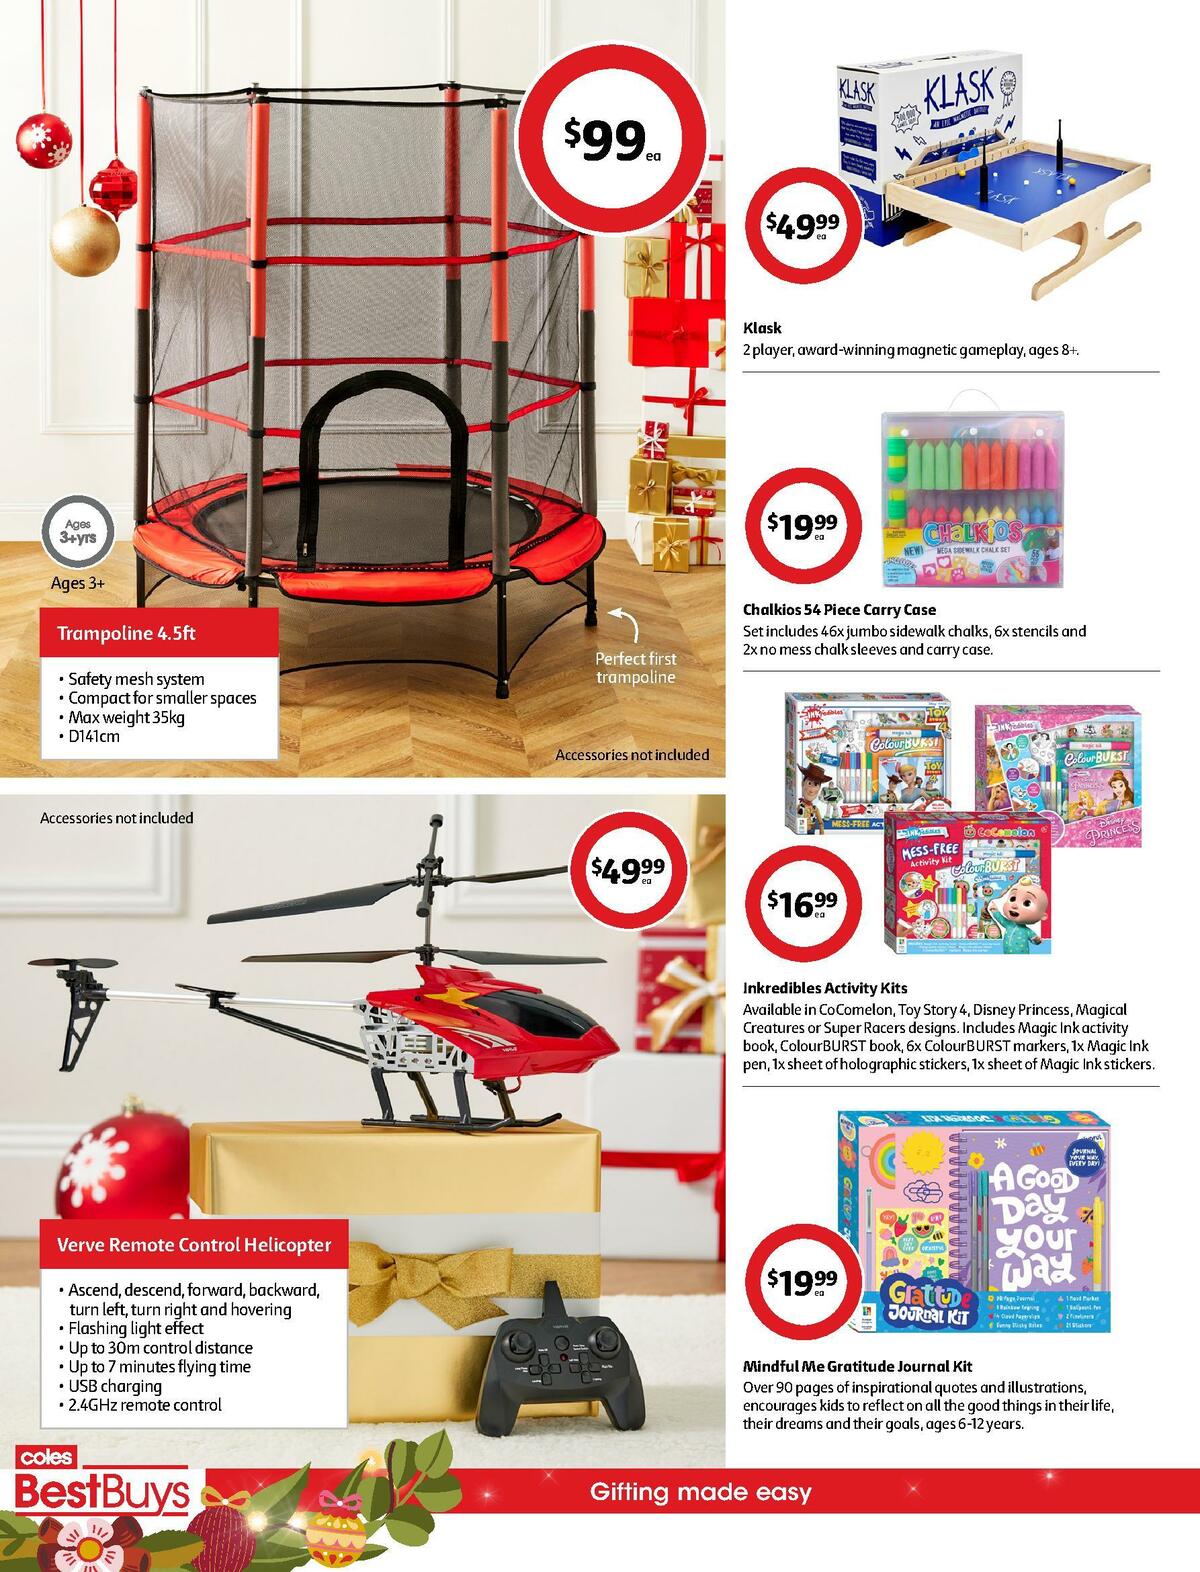 Coles Best Buys - Stocking Stuffers Catalogues from 9 December